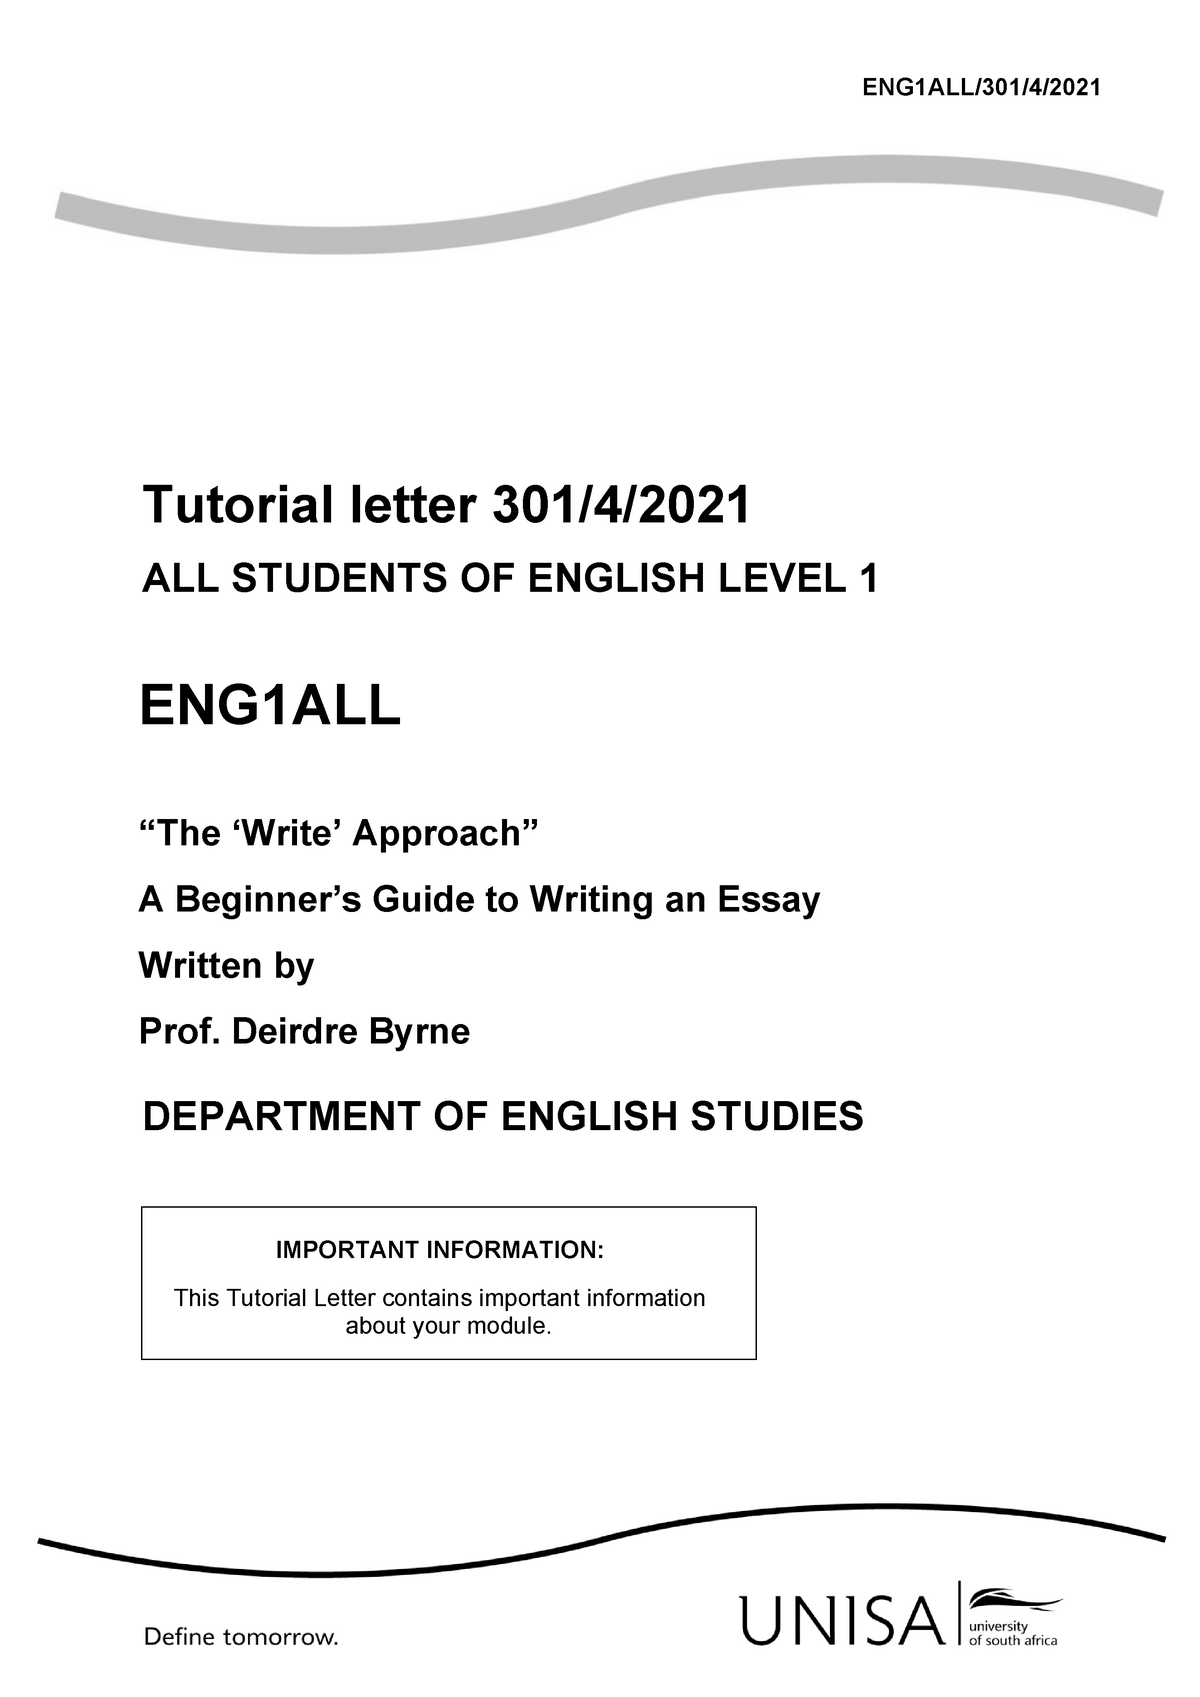 eng1all-a-beginner-s-guide-to-writing-an-essay-eng1all-301-4